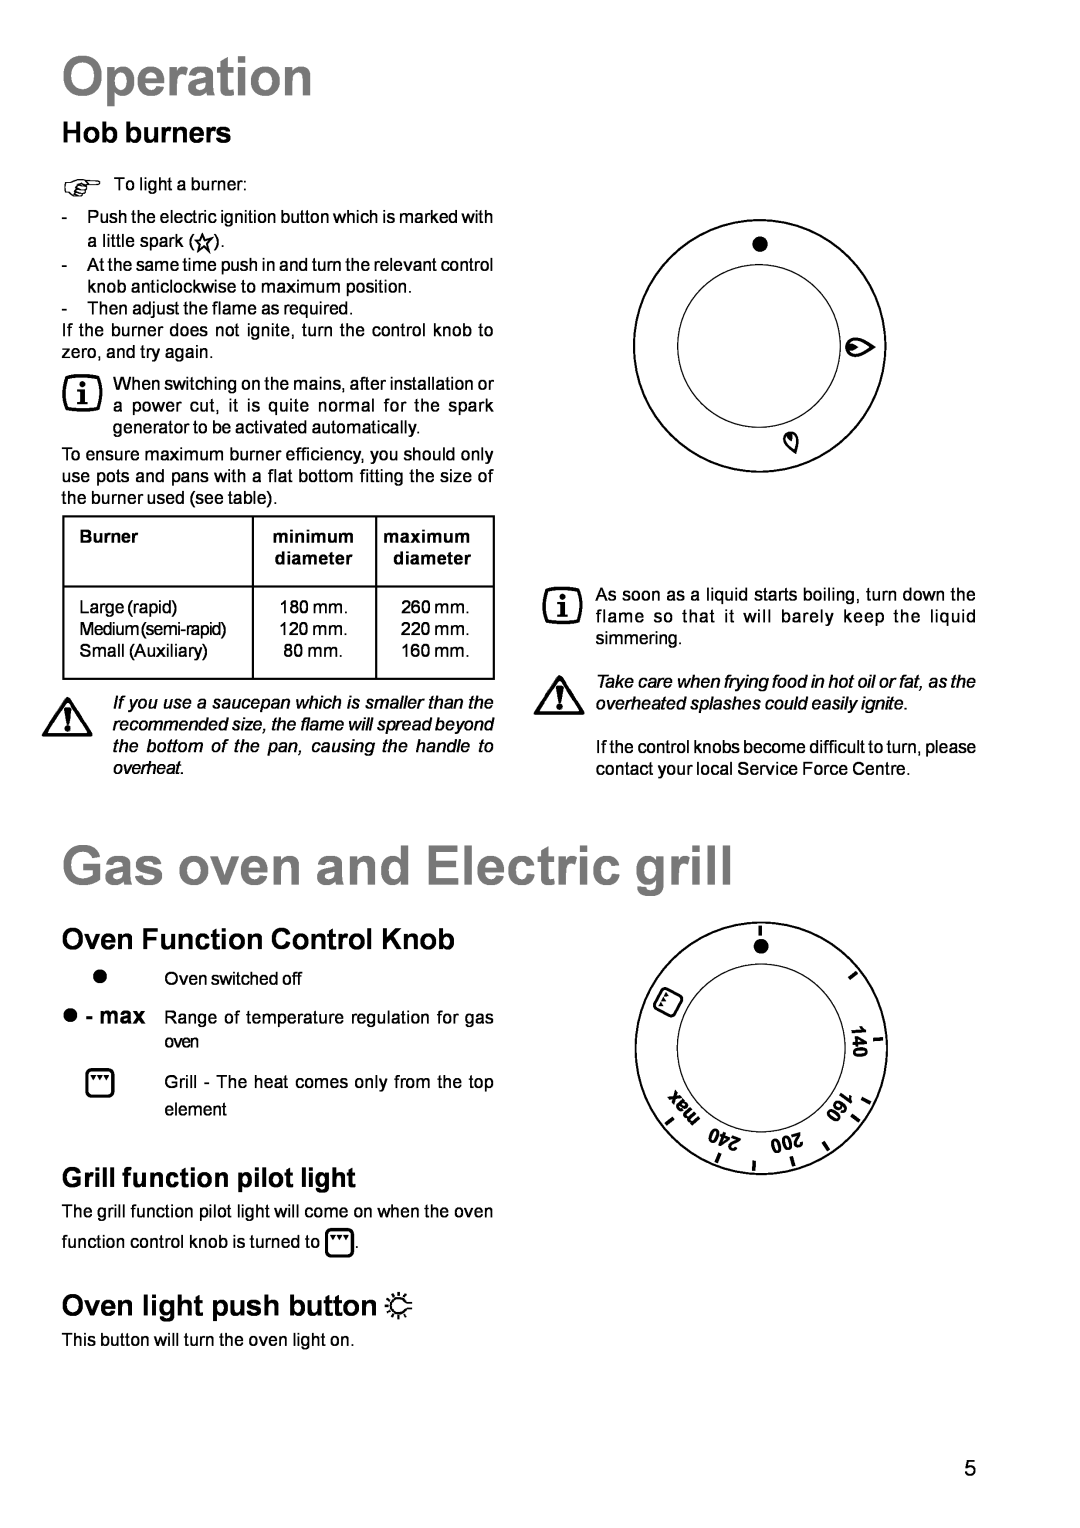 Zanussi ZCG 611 Operation, Gas oven and Electric grill, Hob burners, Oven Function Control Knob, Oven light push button 